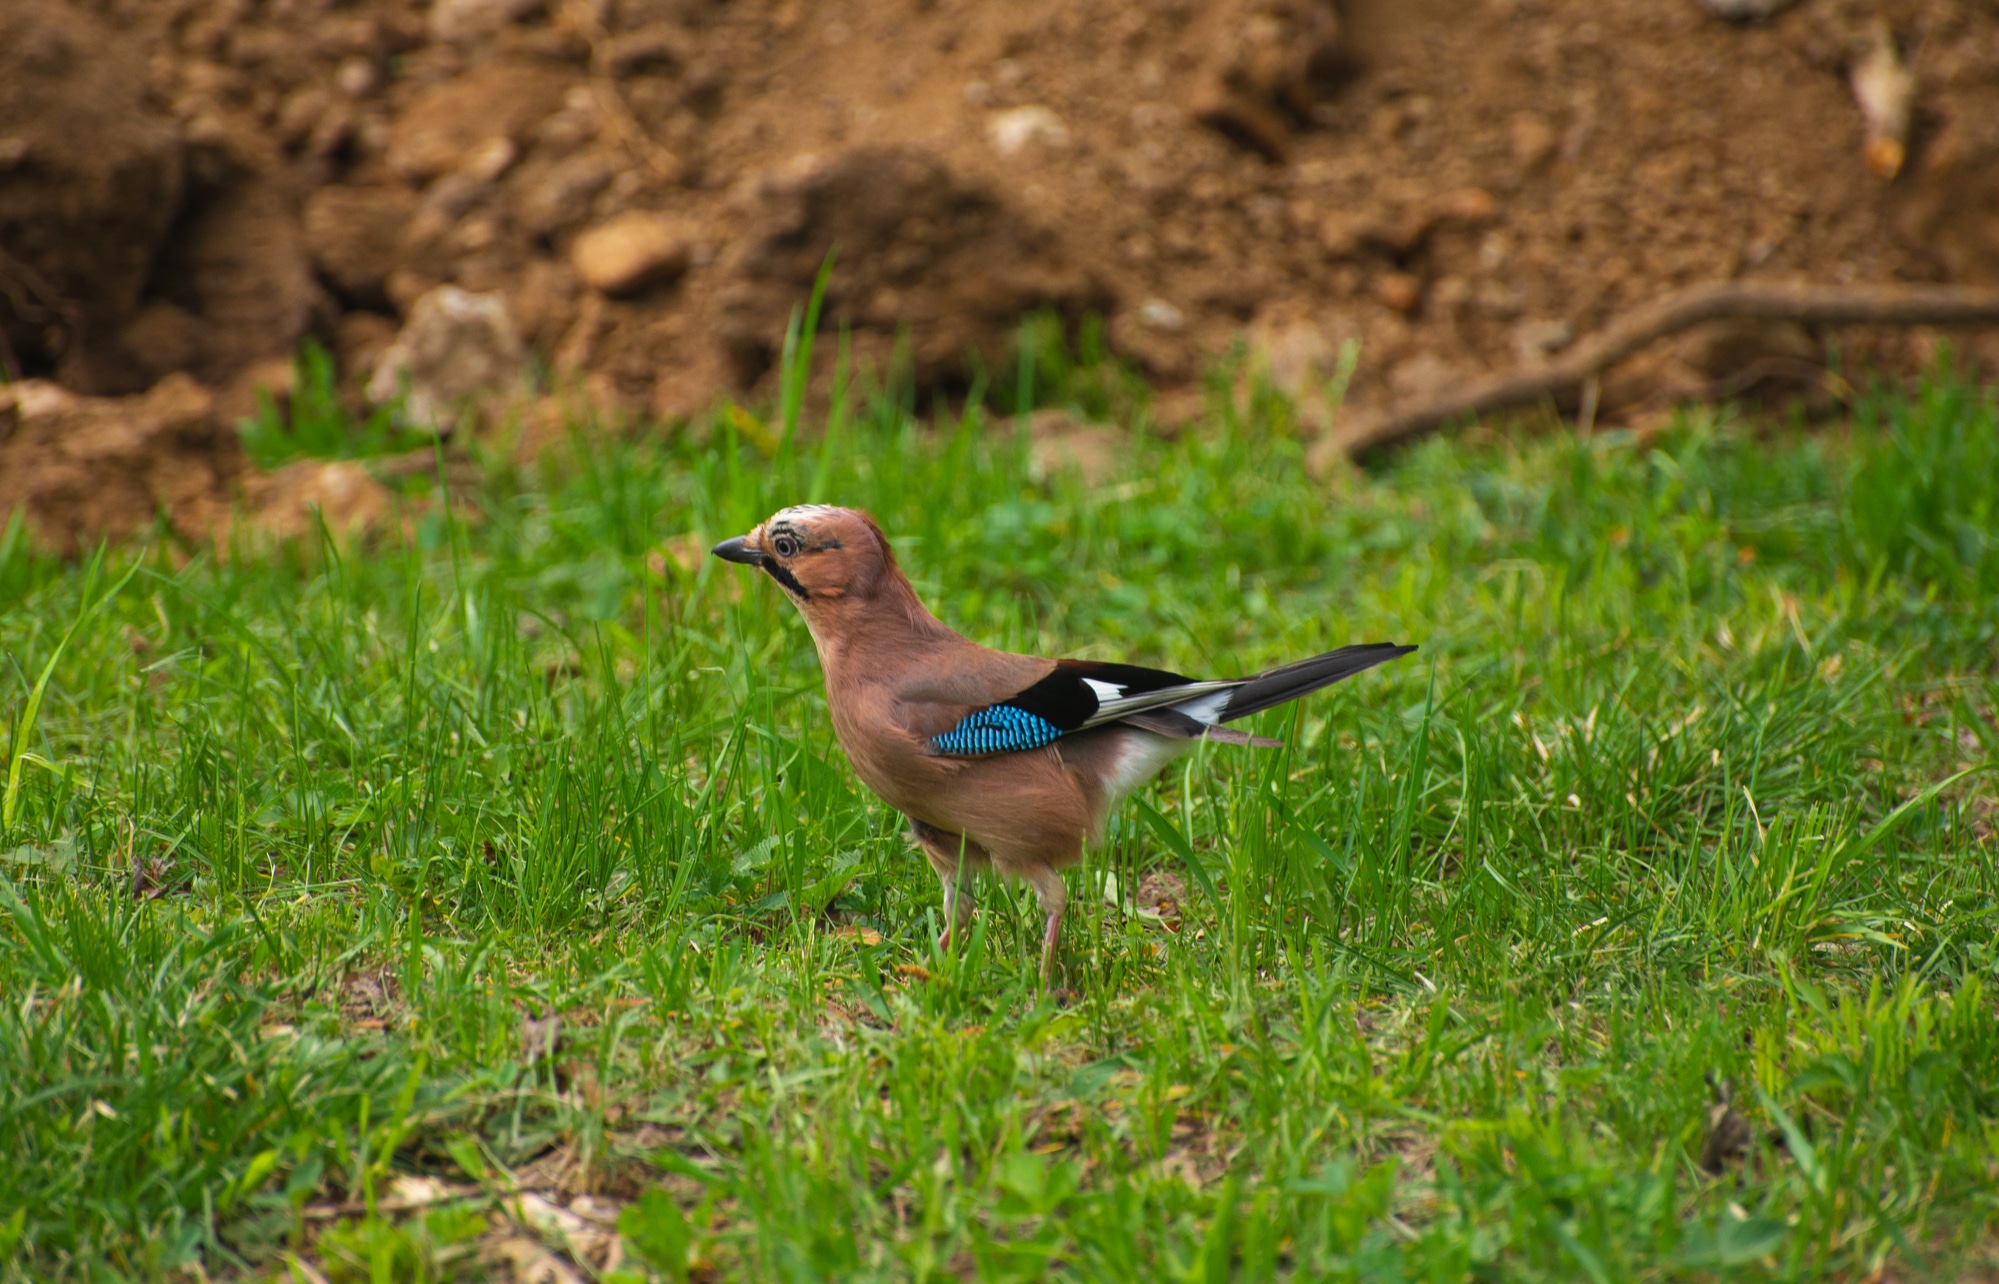 Jay on the grass in the summer